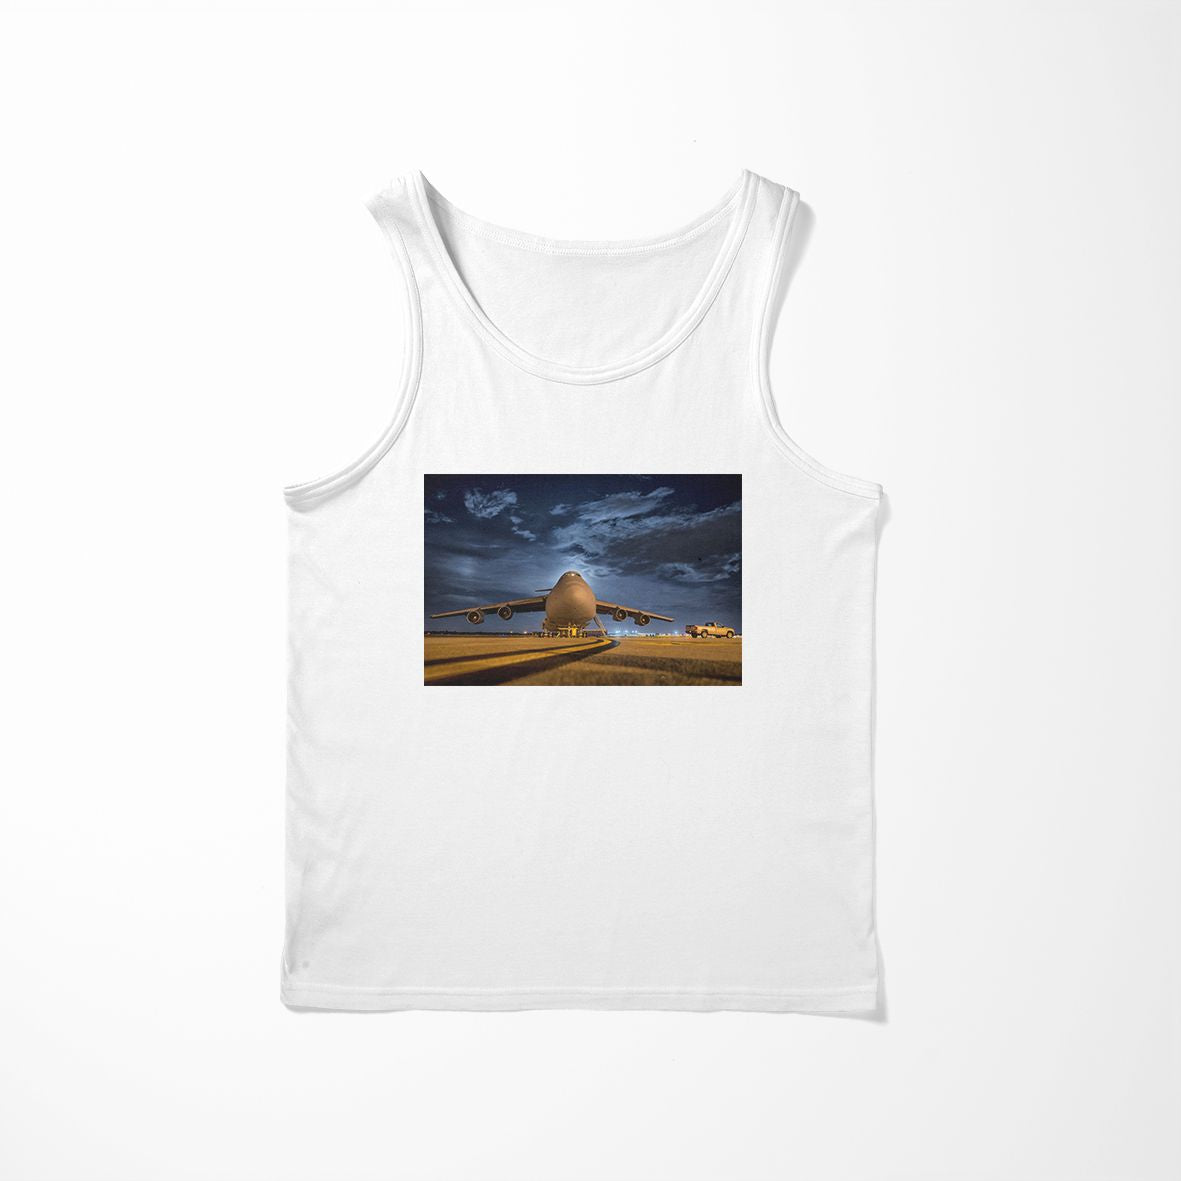 Amazing Military Aircraft at Night Designed Tank Tops